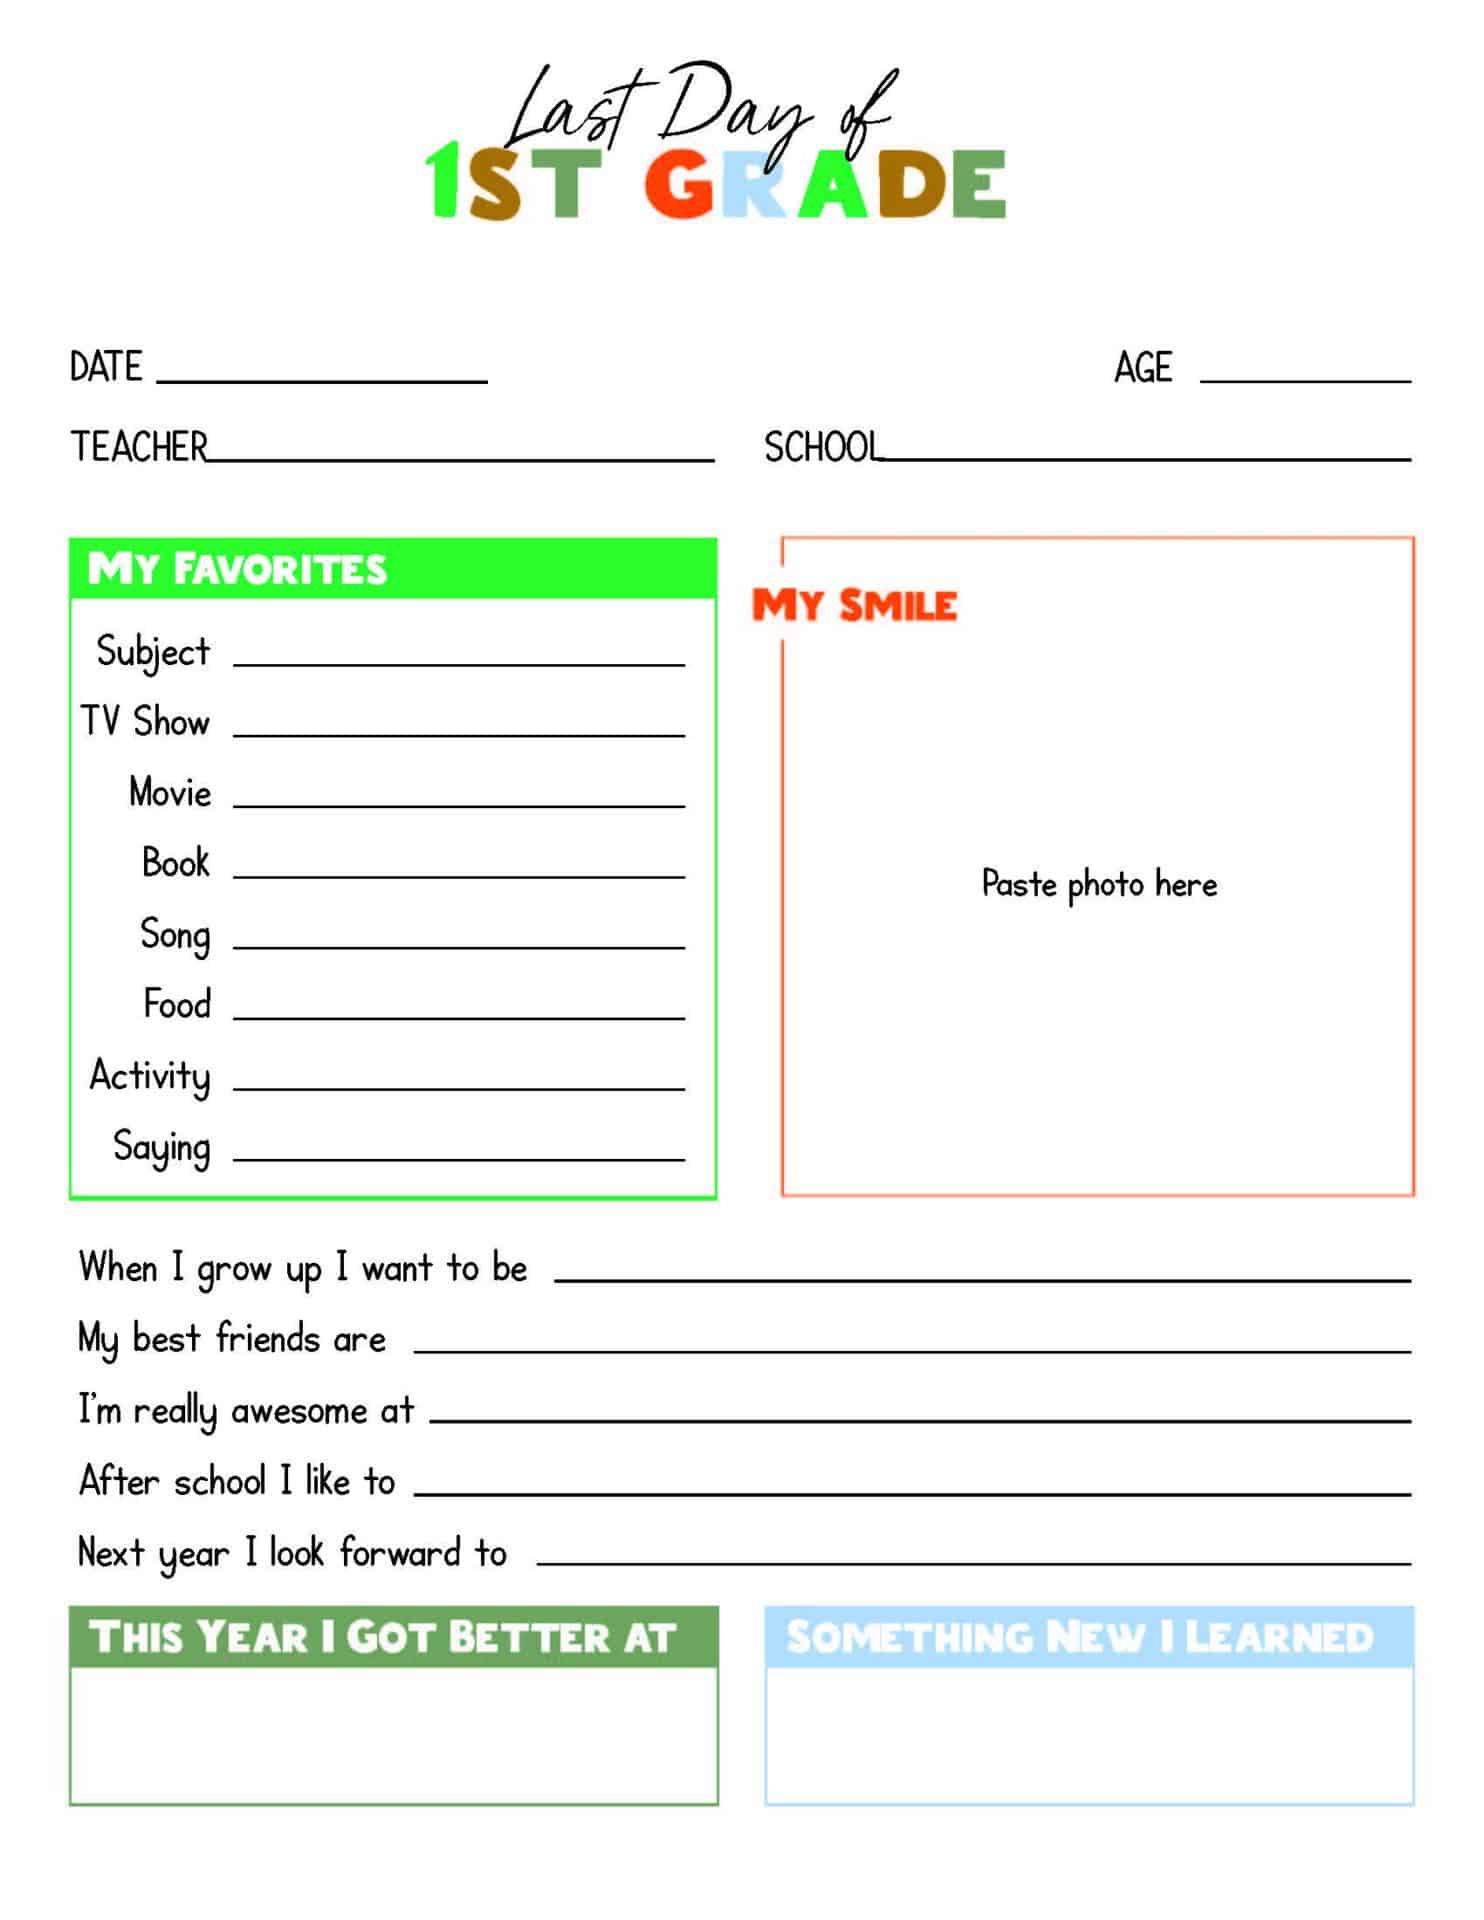 Last Day of School Printables | About Me | PDF for Pre K to 12